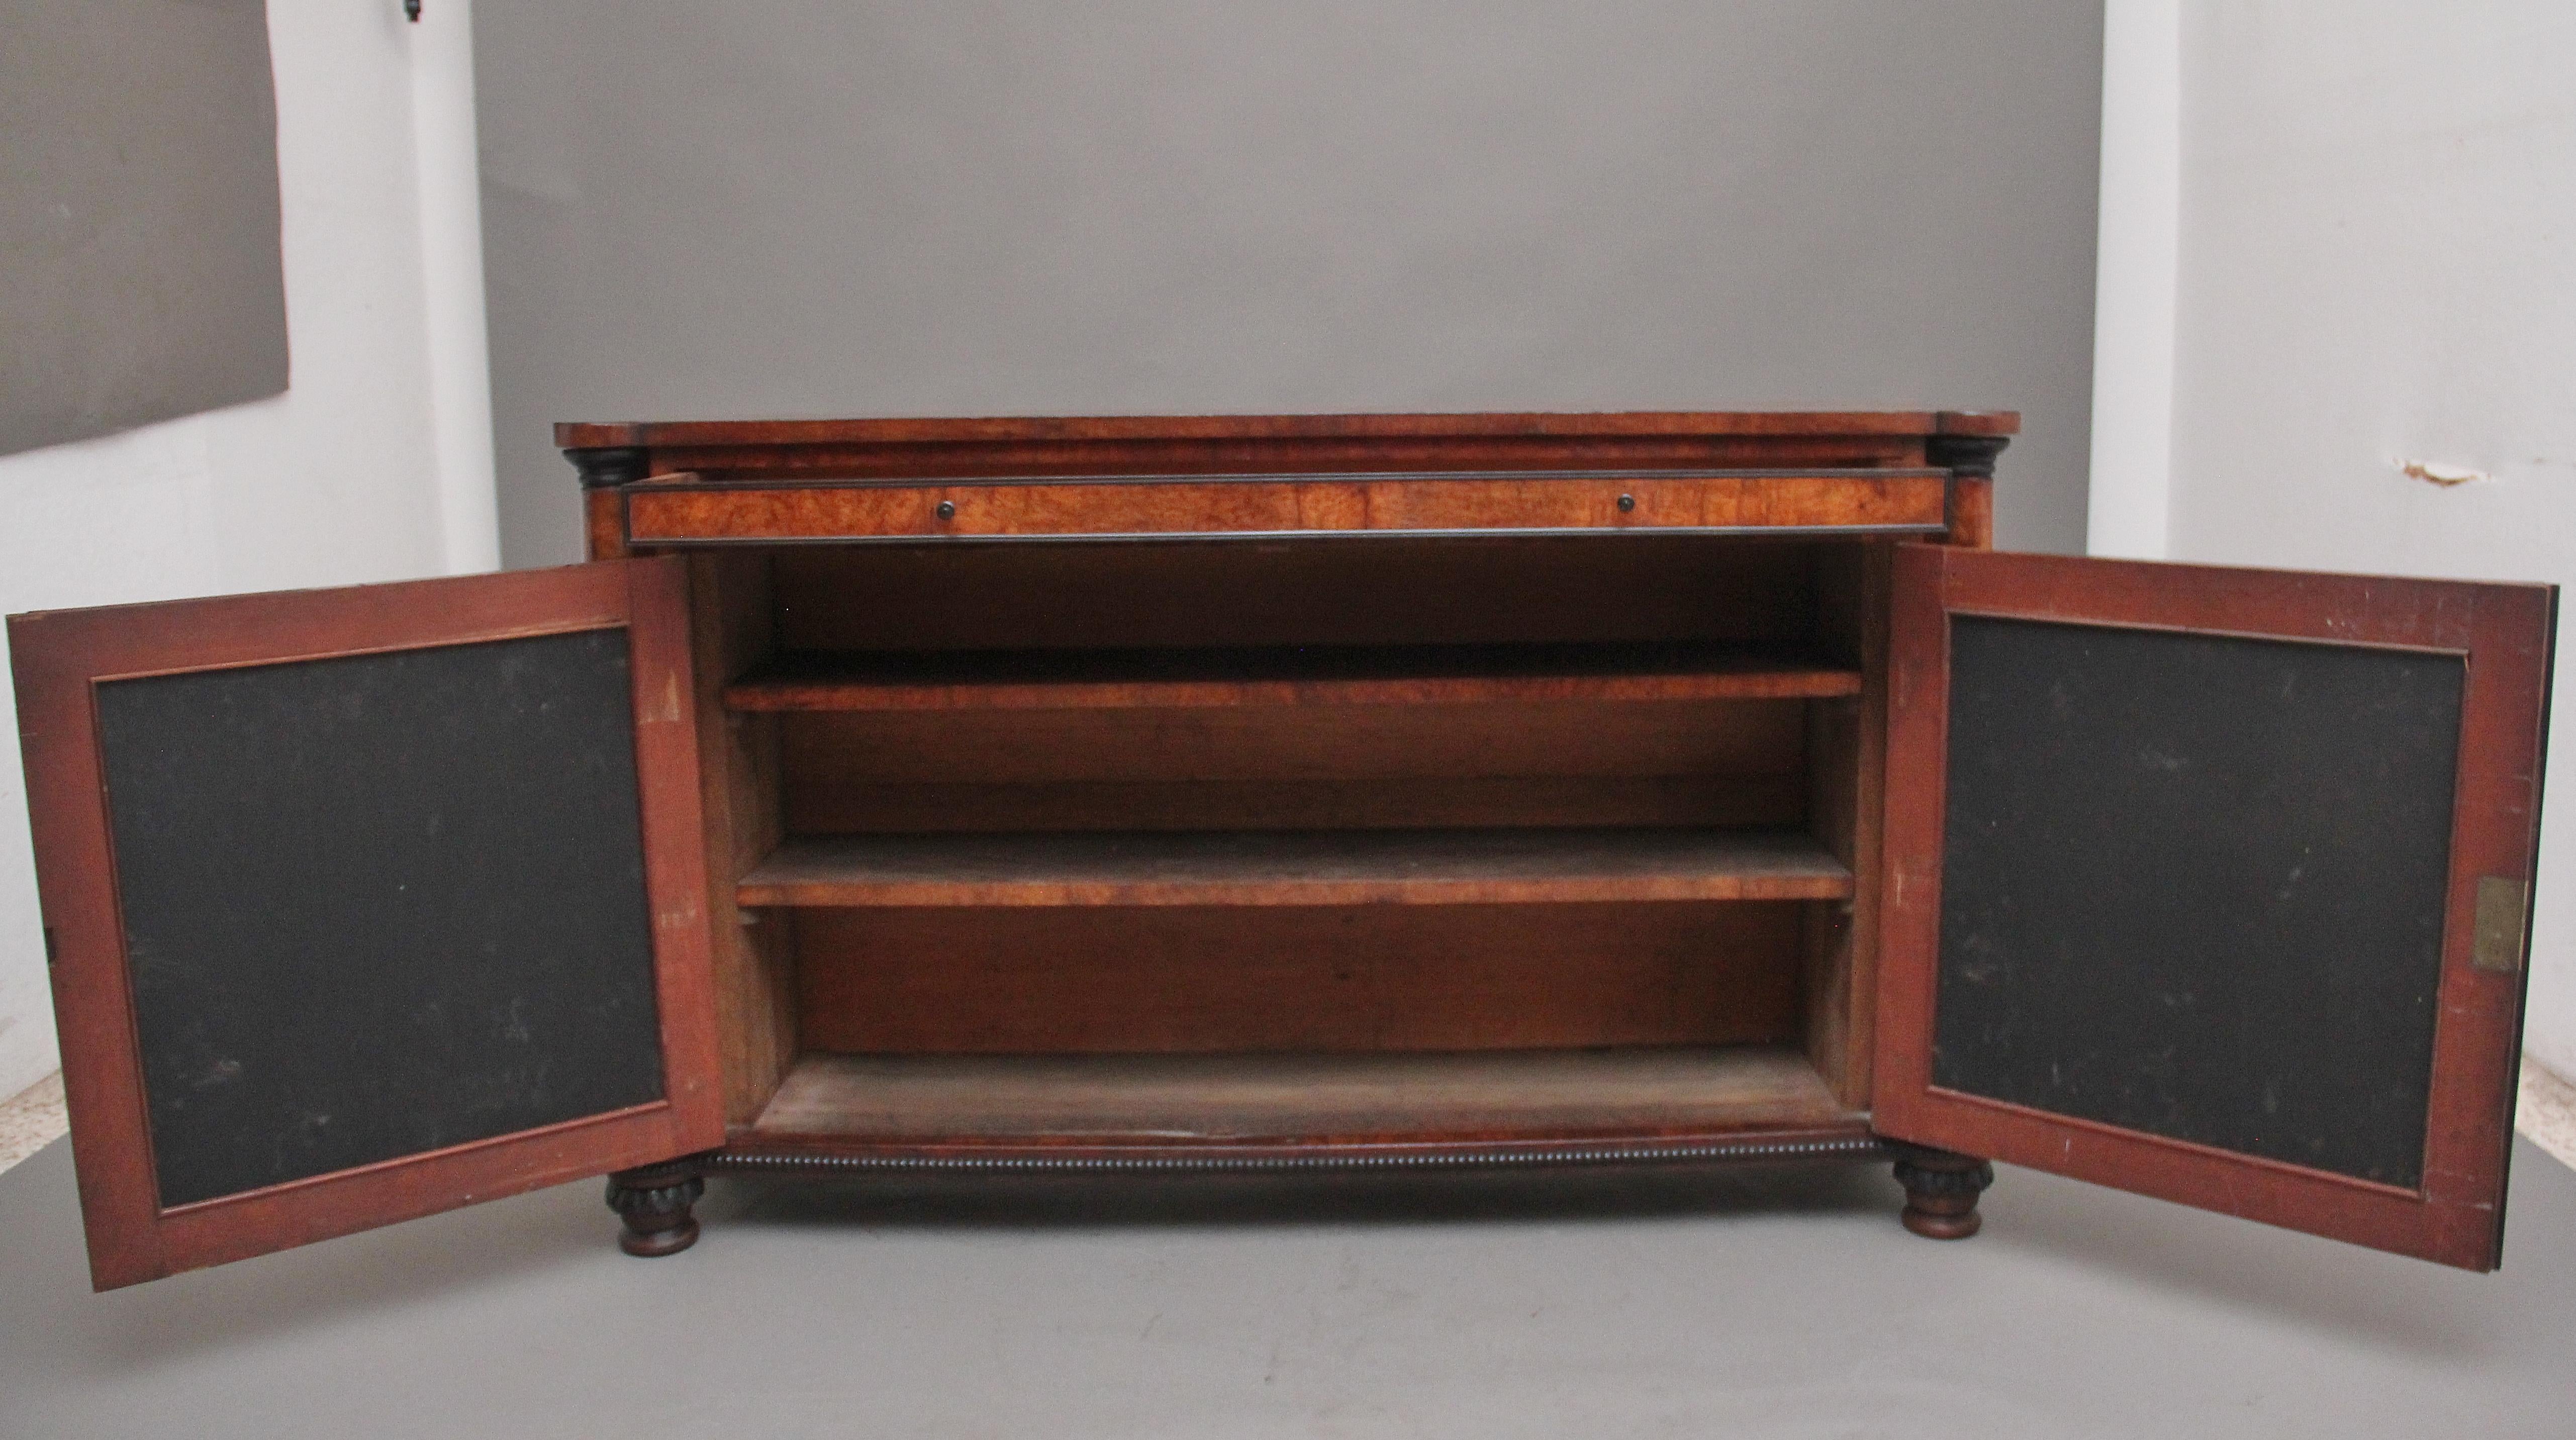 A superb quality early 19th Century pollard oak and ebony cabinet in the style of George Bullock, having a wonderfully figured rectangular top decorated with ebony inlay, a long frieze drawer below with the original ebonised turned handles and the